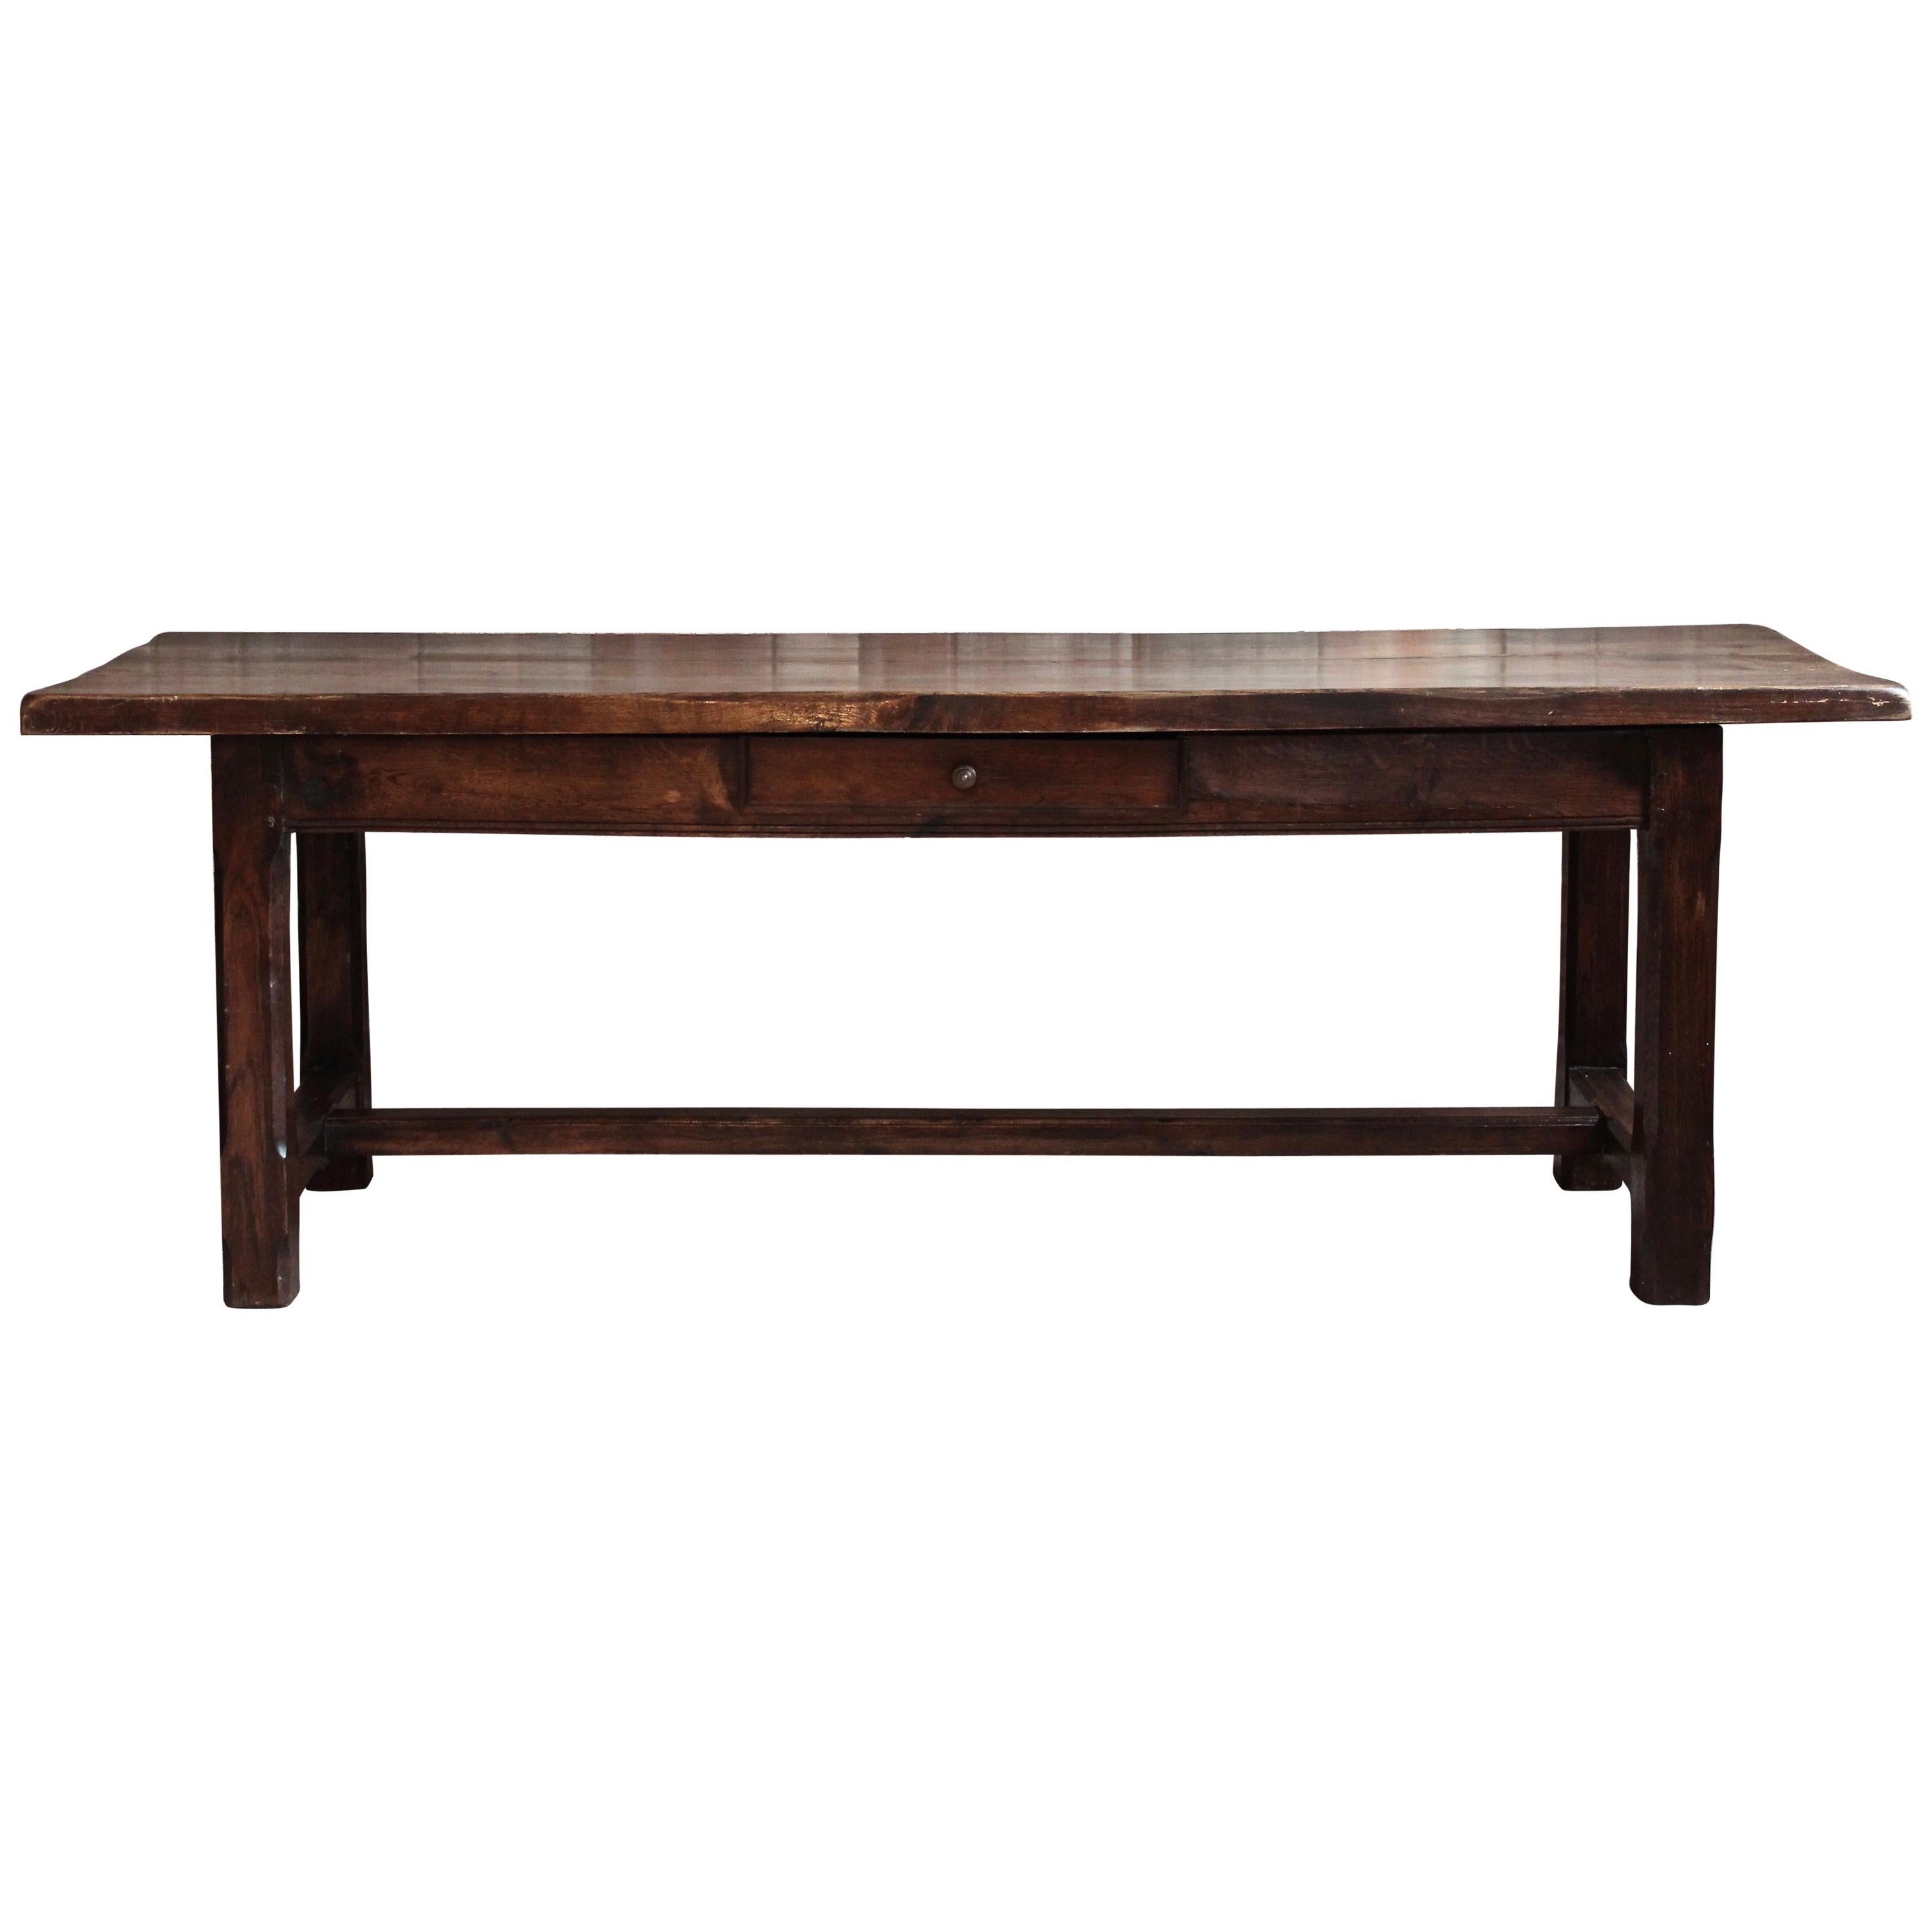 French, late 19th or early 20th Century Farm Dining Table, Solid Oak